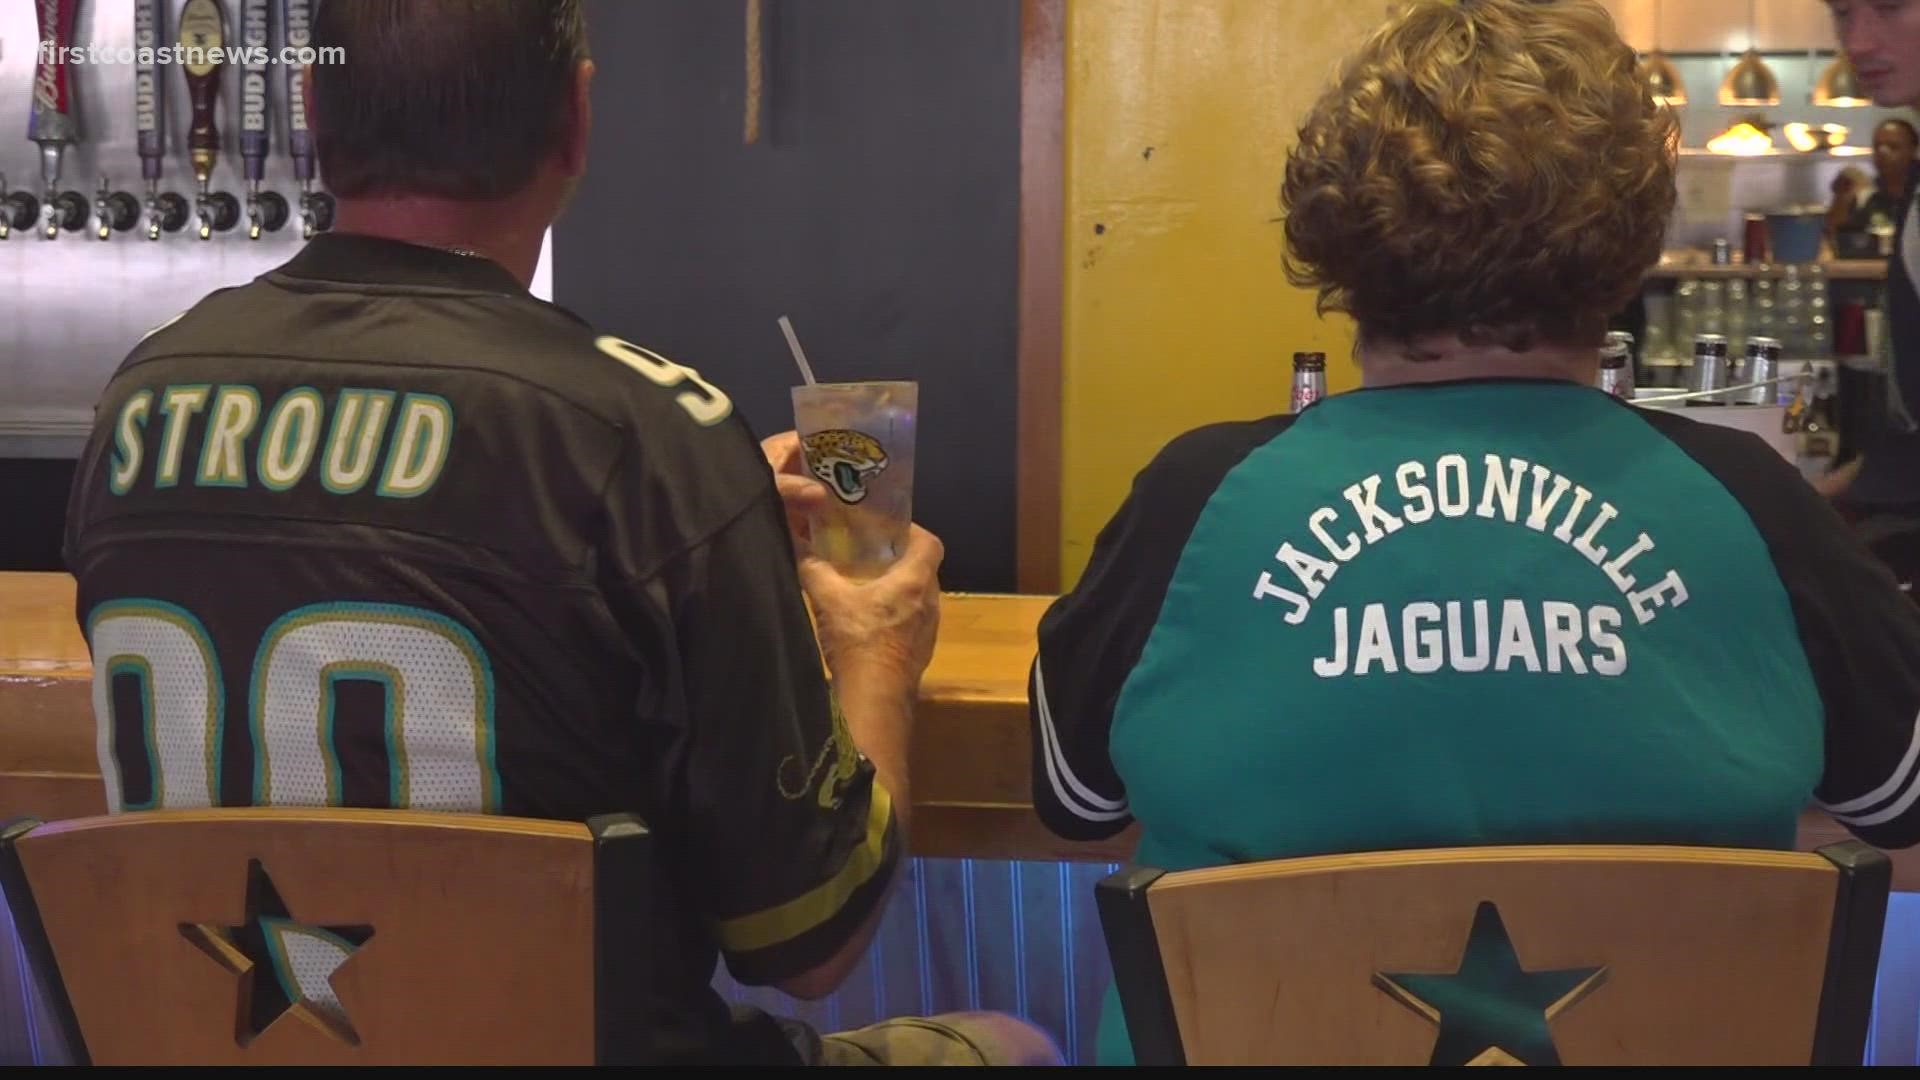 Places like Sneakers Sports Grille in Jax Beach saw crowds of fans rocking their best Jags gear to cheer on their team.